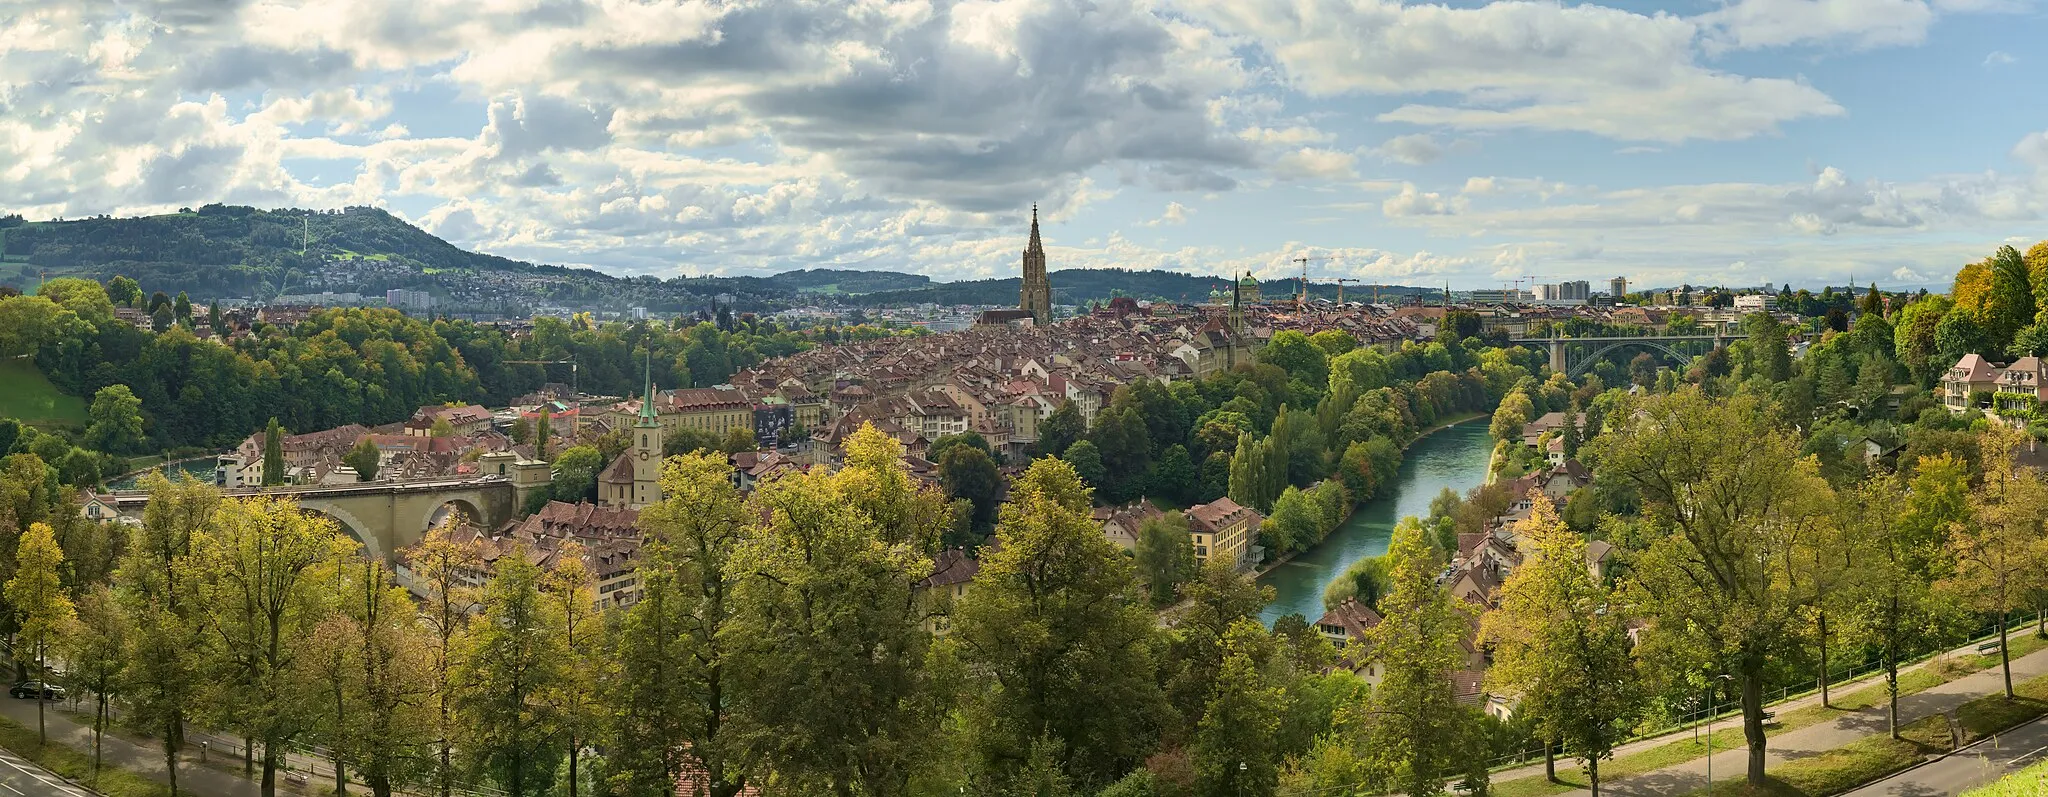 Photo showing: Panoramic view of the old town of Bern from Rosengarten.  This view includes the main landmarks like the Bern Minster, the Bundeshaus (Federal Palace of Switzerland) and the Aare river.  This is a panorama in cylindrical projection fused from two exposure layers and 31 images each.